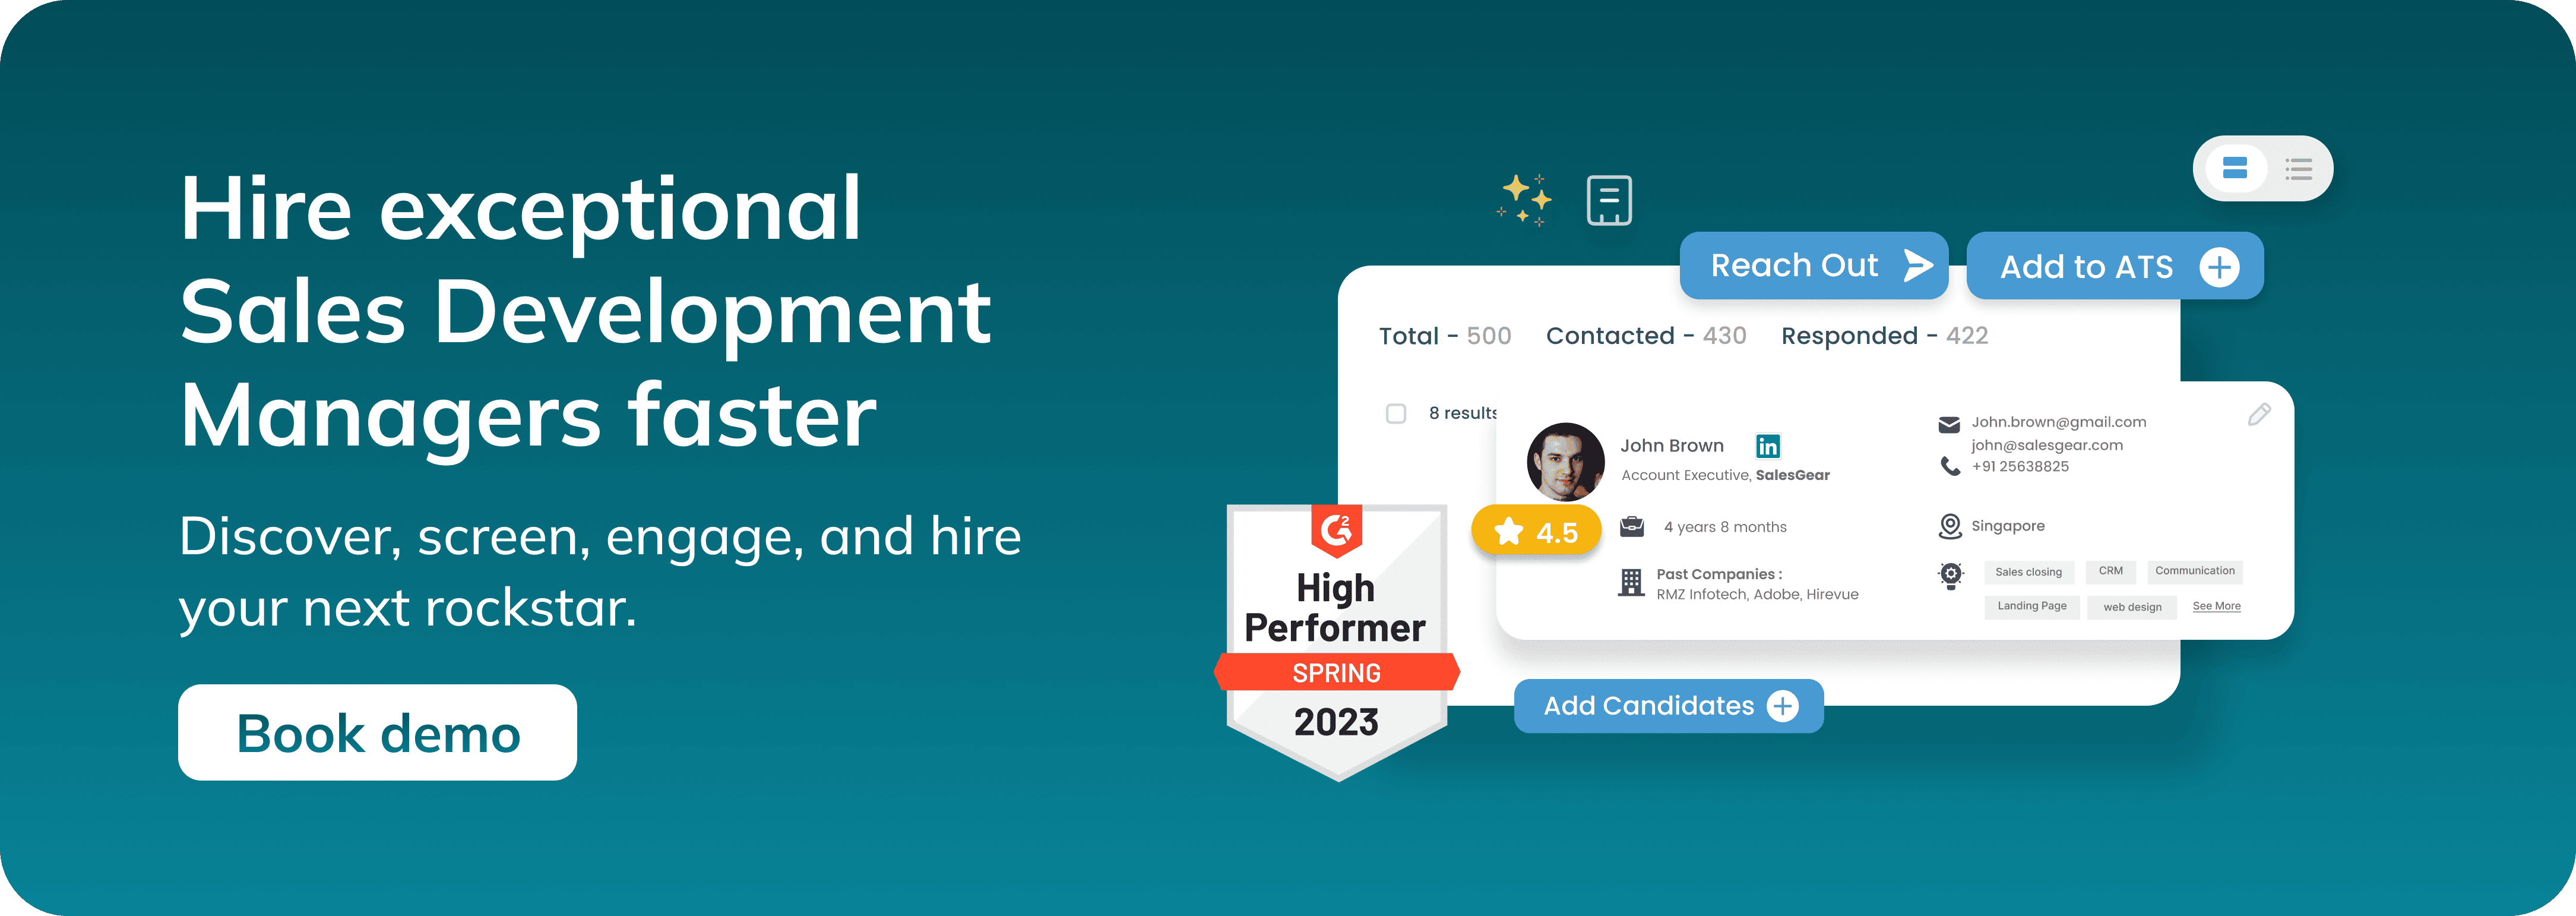 Hire Exceptional Sales Devlopment managers faster.png